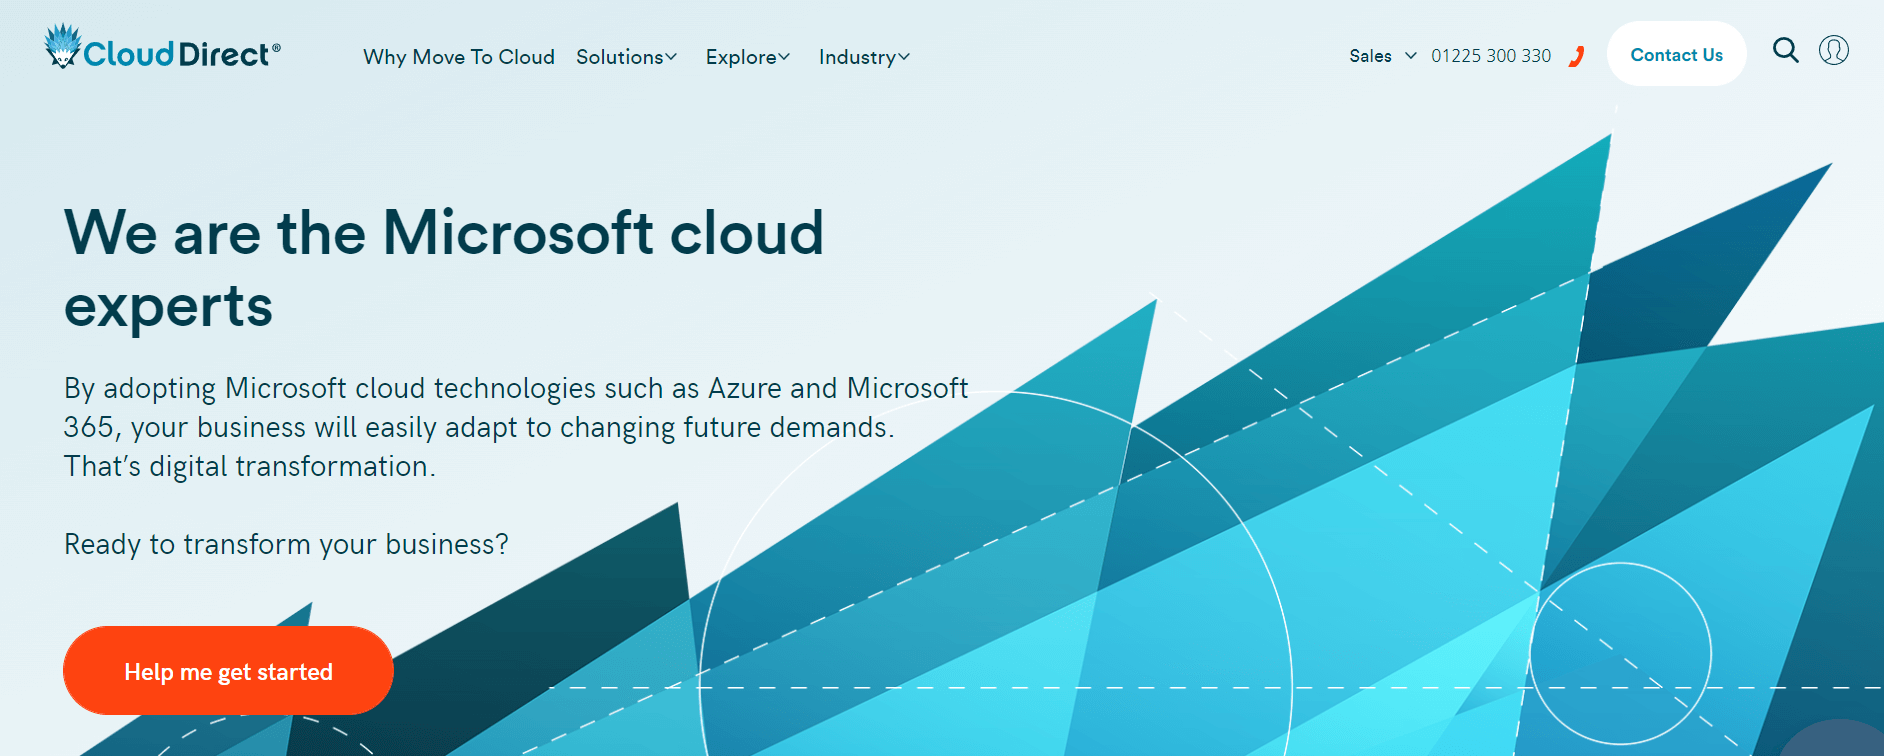 Cloud Direct homepage: We are the Microsoft cloud experts